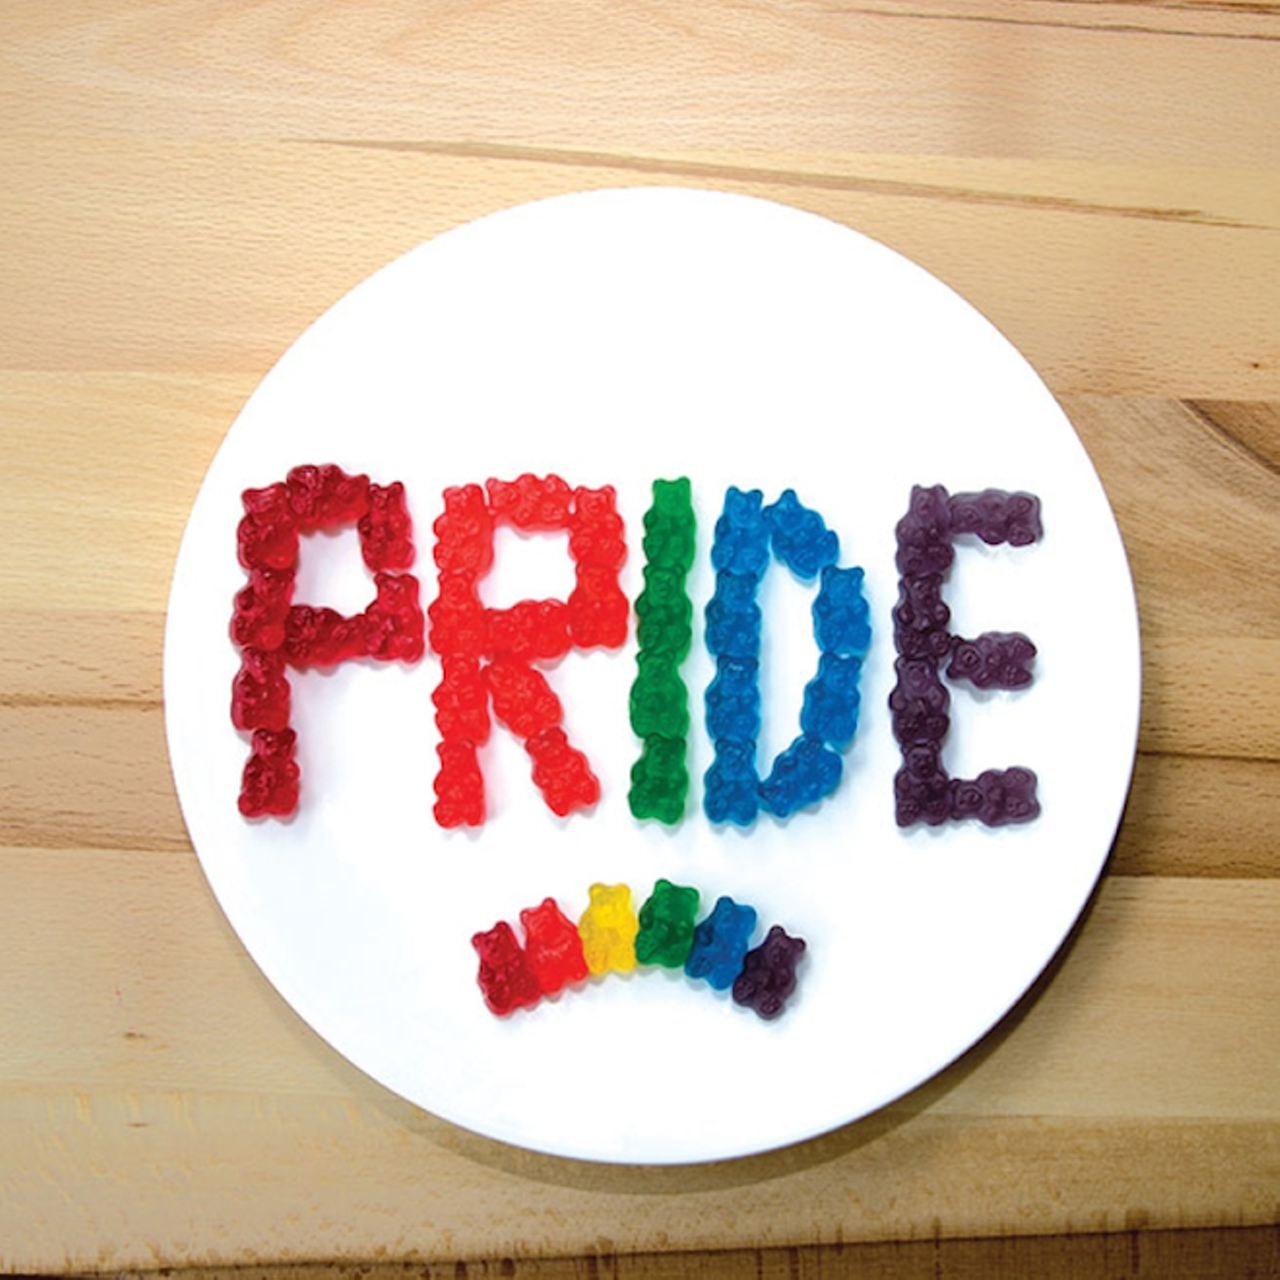 Wednesday, Oct. 8 - Sunday, Oct. 12Come Out with Pride 2014Events you don&#146;t want to miss.